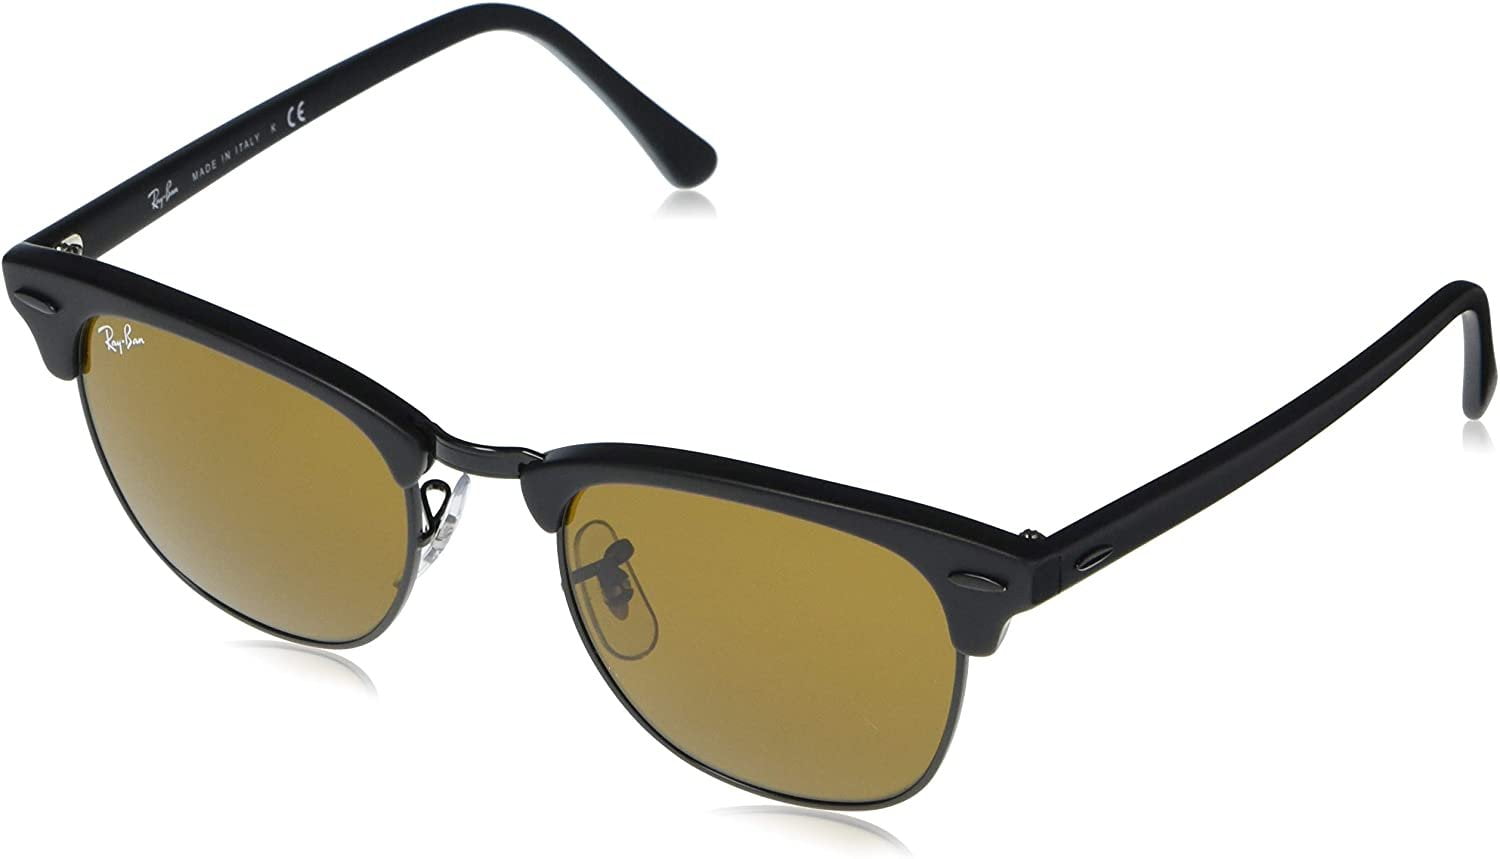 Persoon belast met sportgame feedback Medisch Ray-Ban Rb3016 Clubmaster Square Sunglasses - Walmart.com